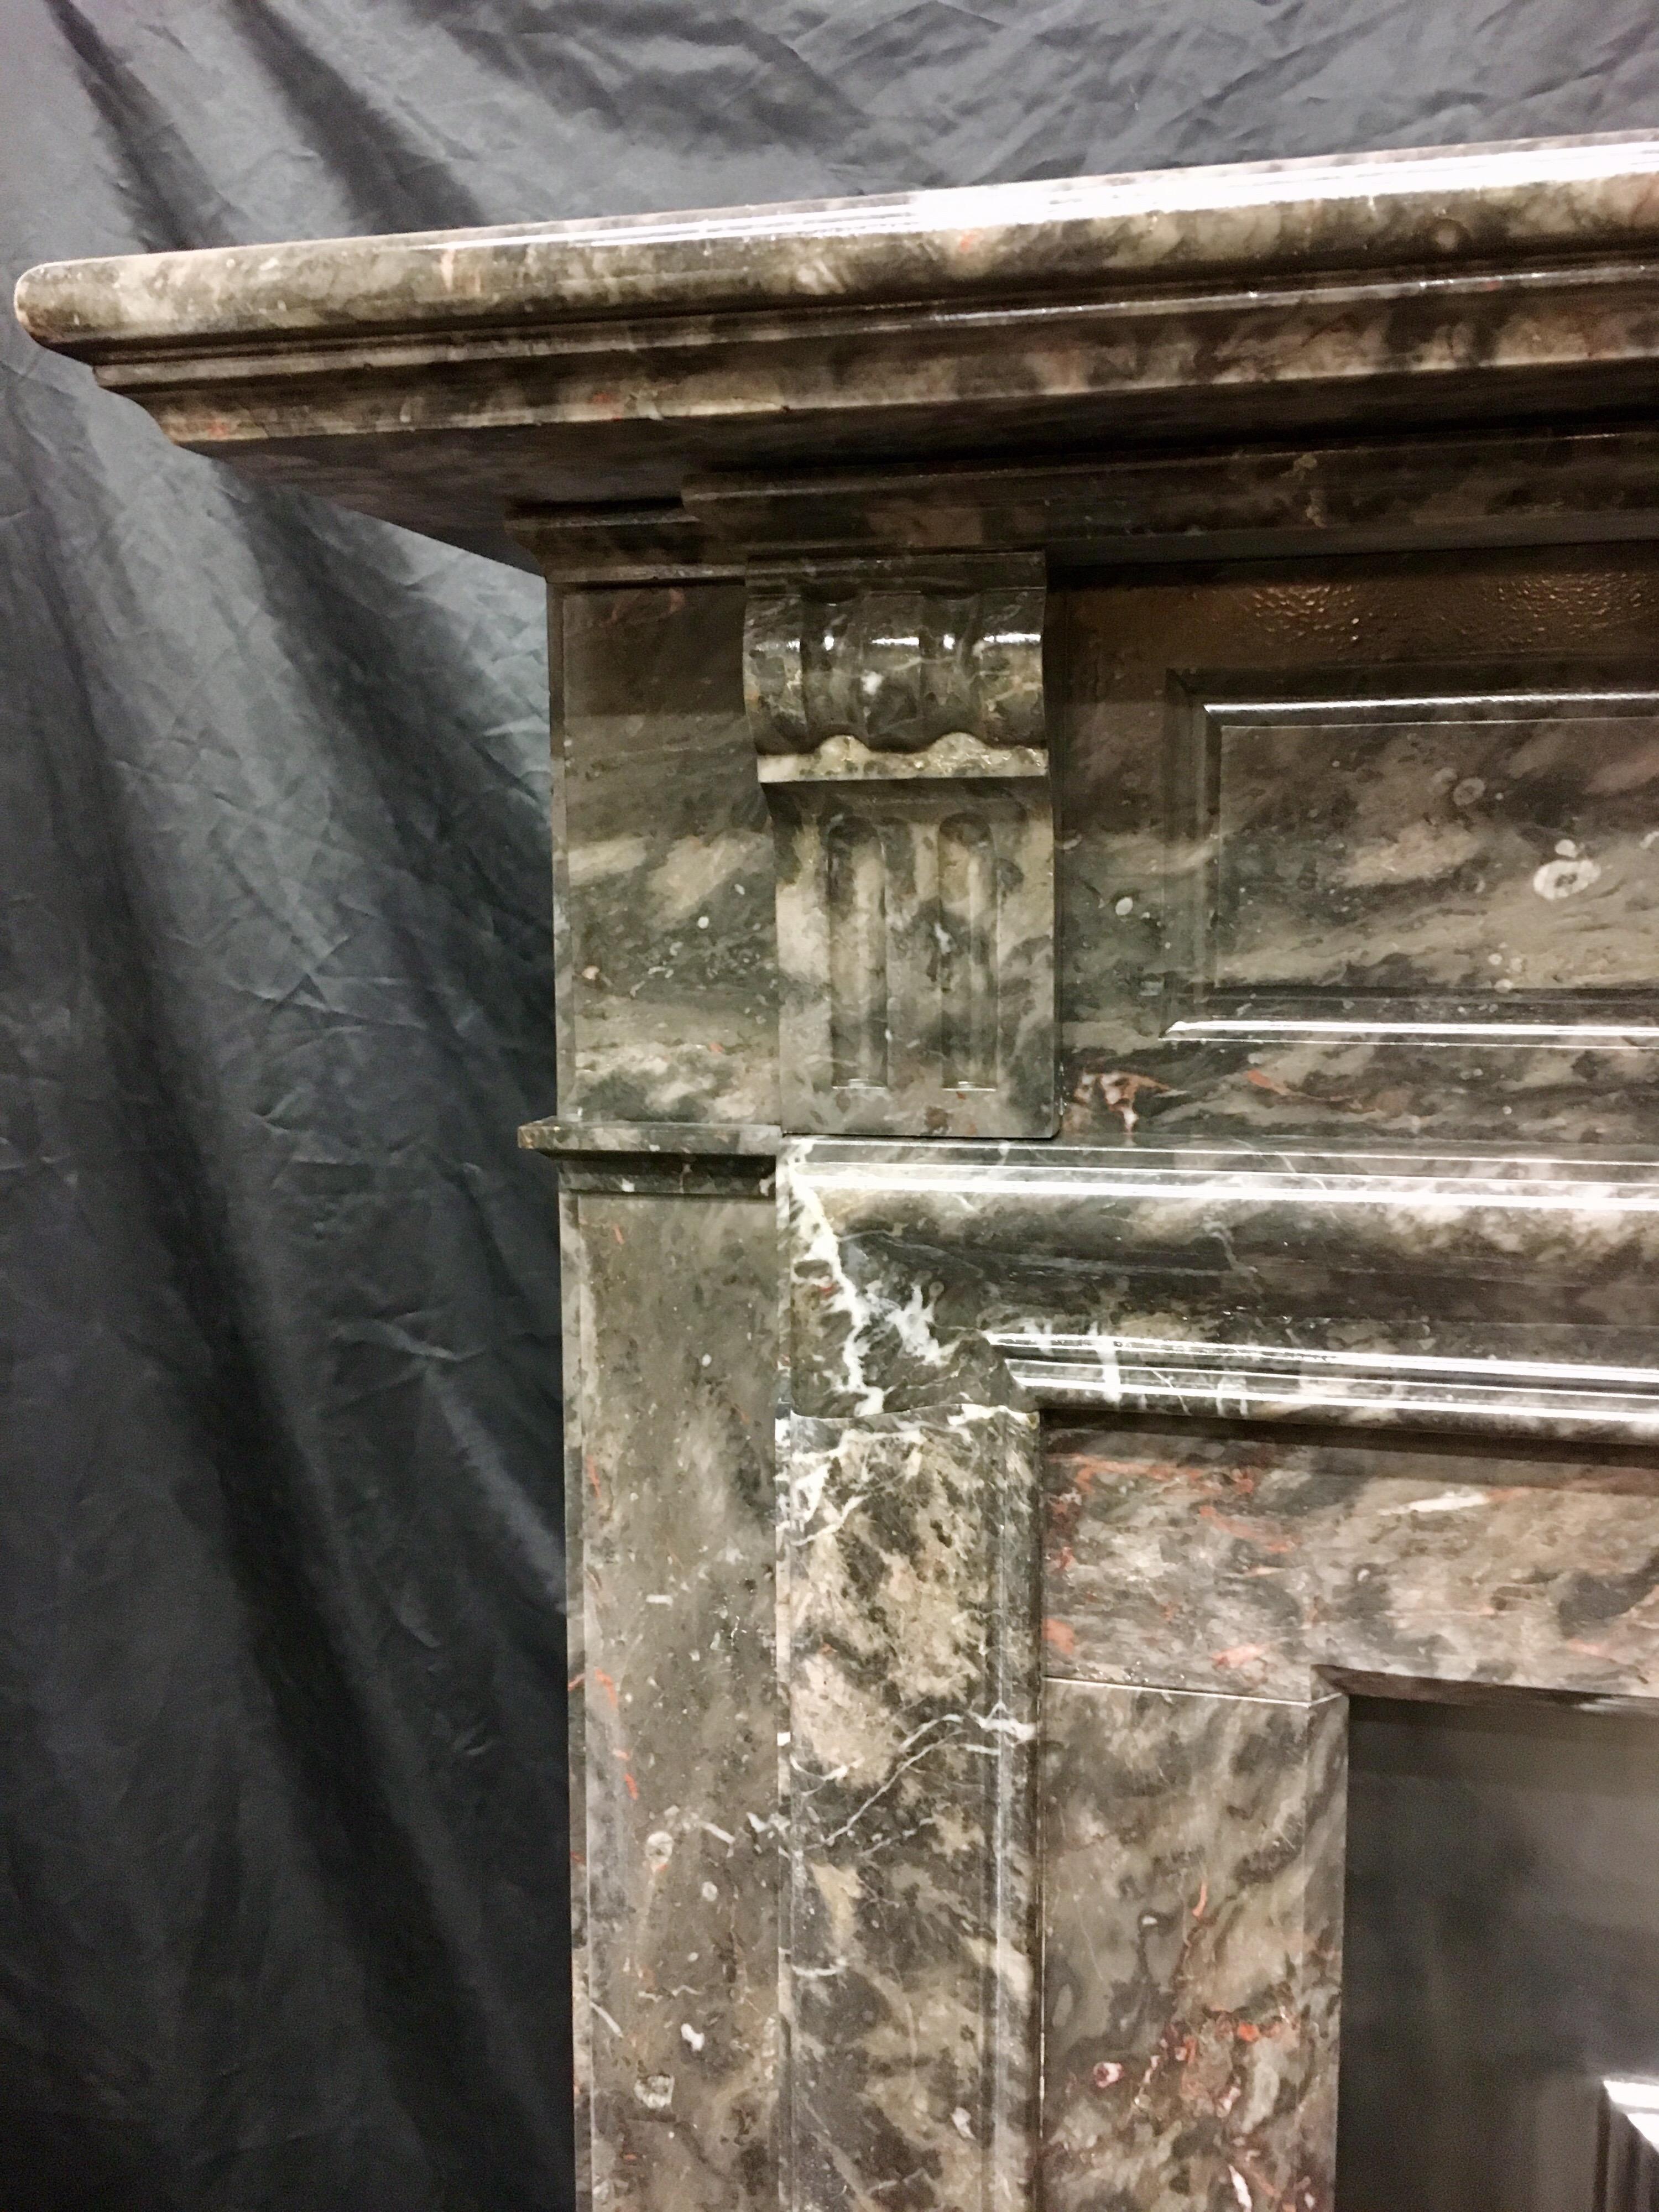 A superb, tall and elegant 19th century rare Victorian corbeled and panelled period fireplace in rich variated- fossilised soft Grey Ashburton marble. This rare and wonderful fireplace, striking with its Fifty Shades of Grey colouration, in its